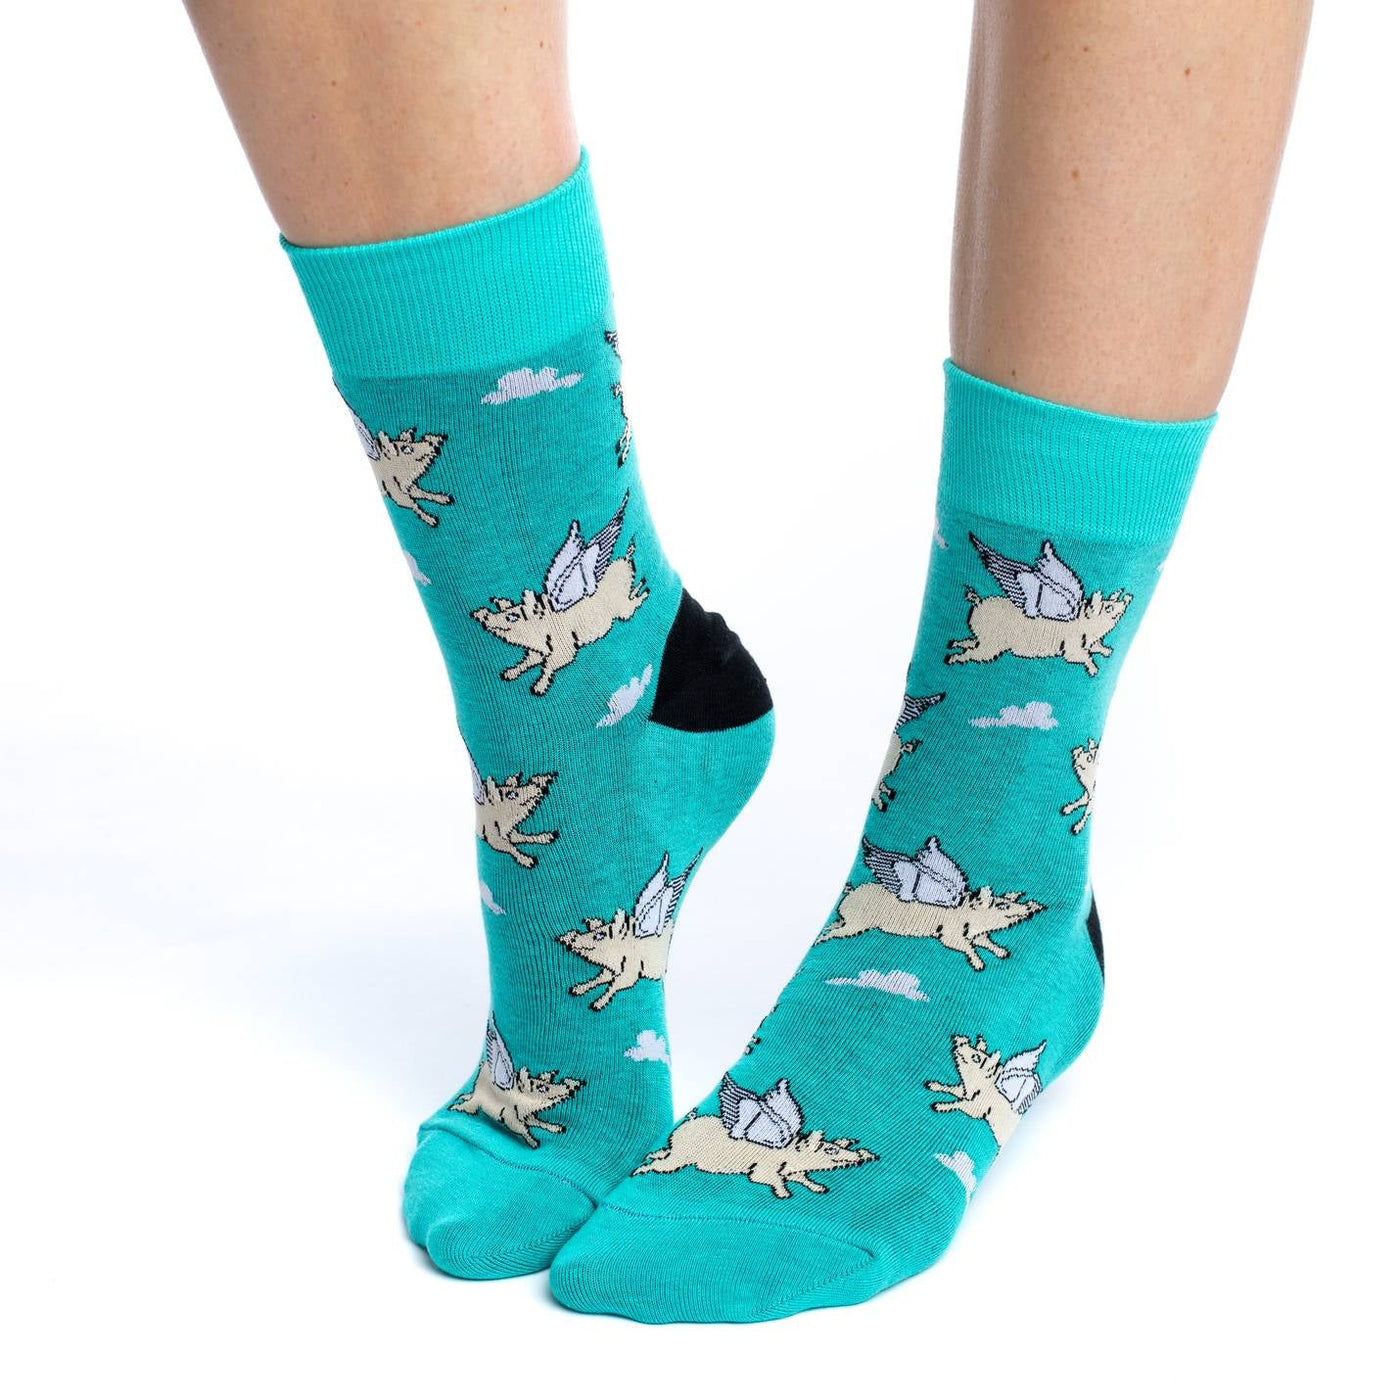 “Flying Pigs" Cotton Crew Socks by Good Luck Sock